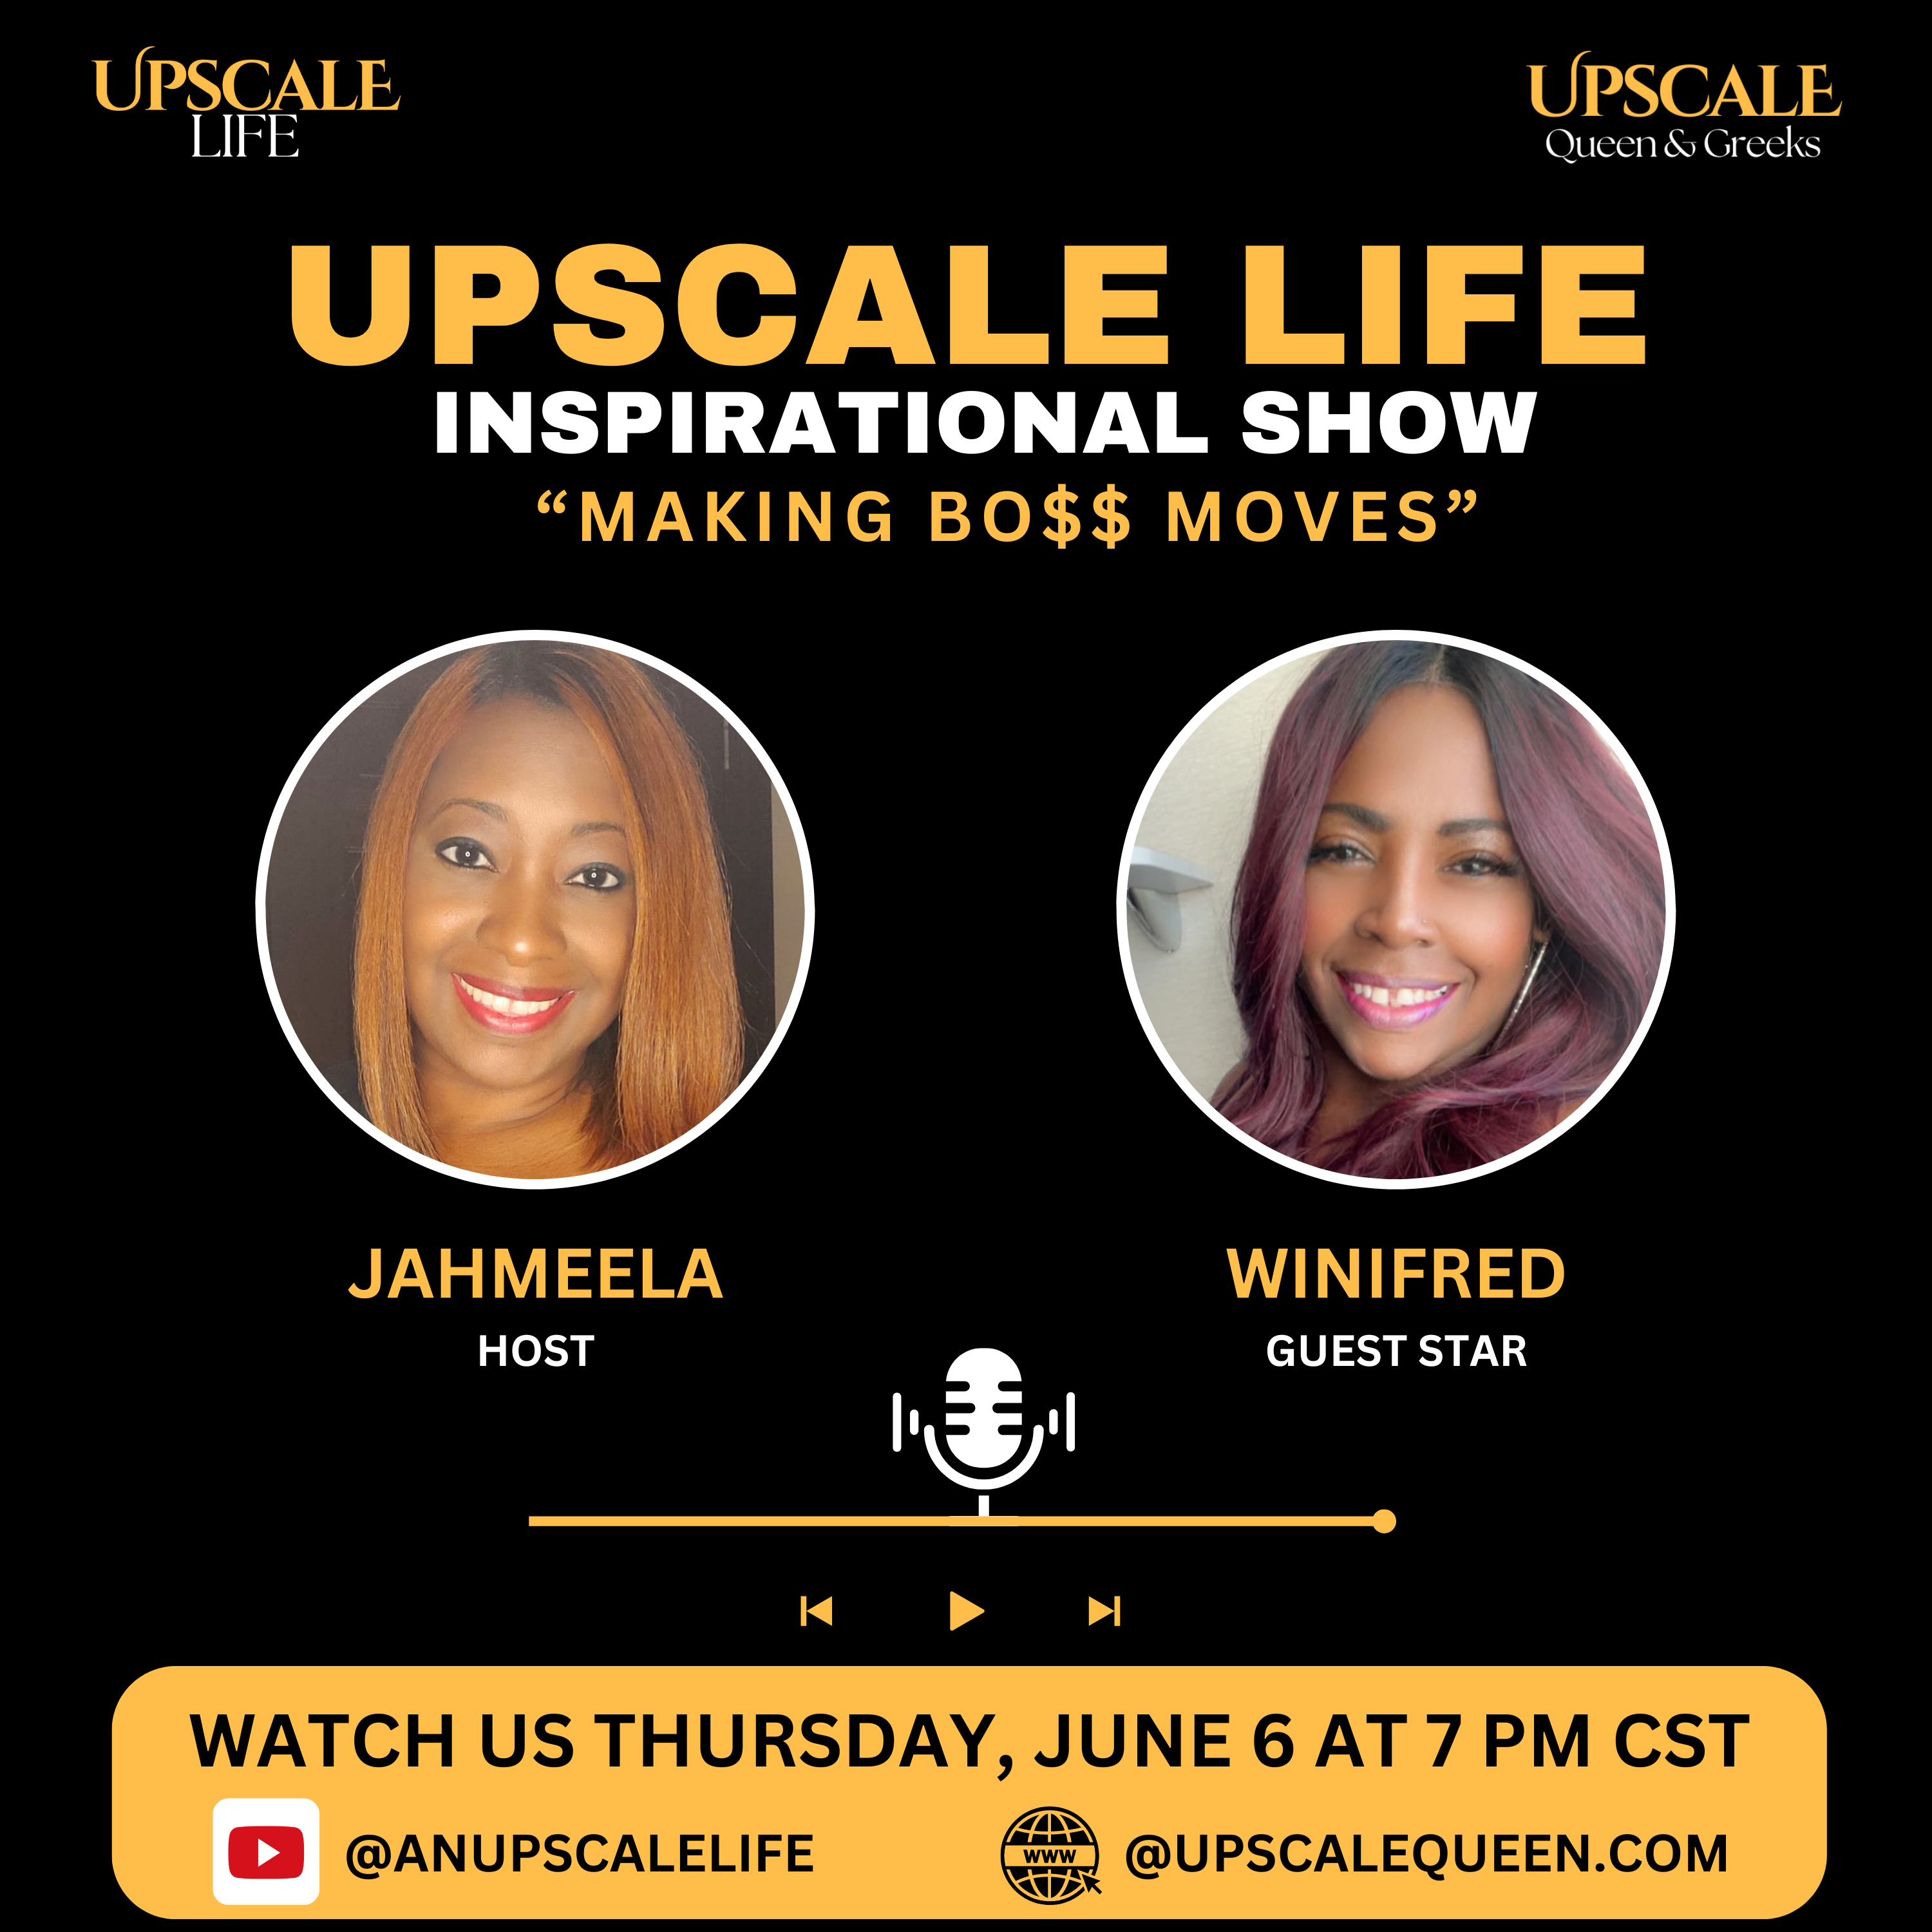 Living an Upscale Life Inspirational Show featuring Winifred